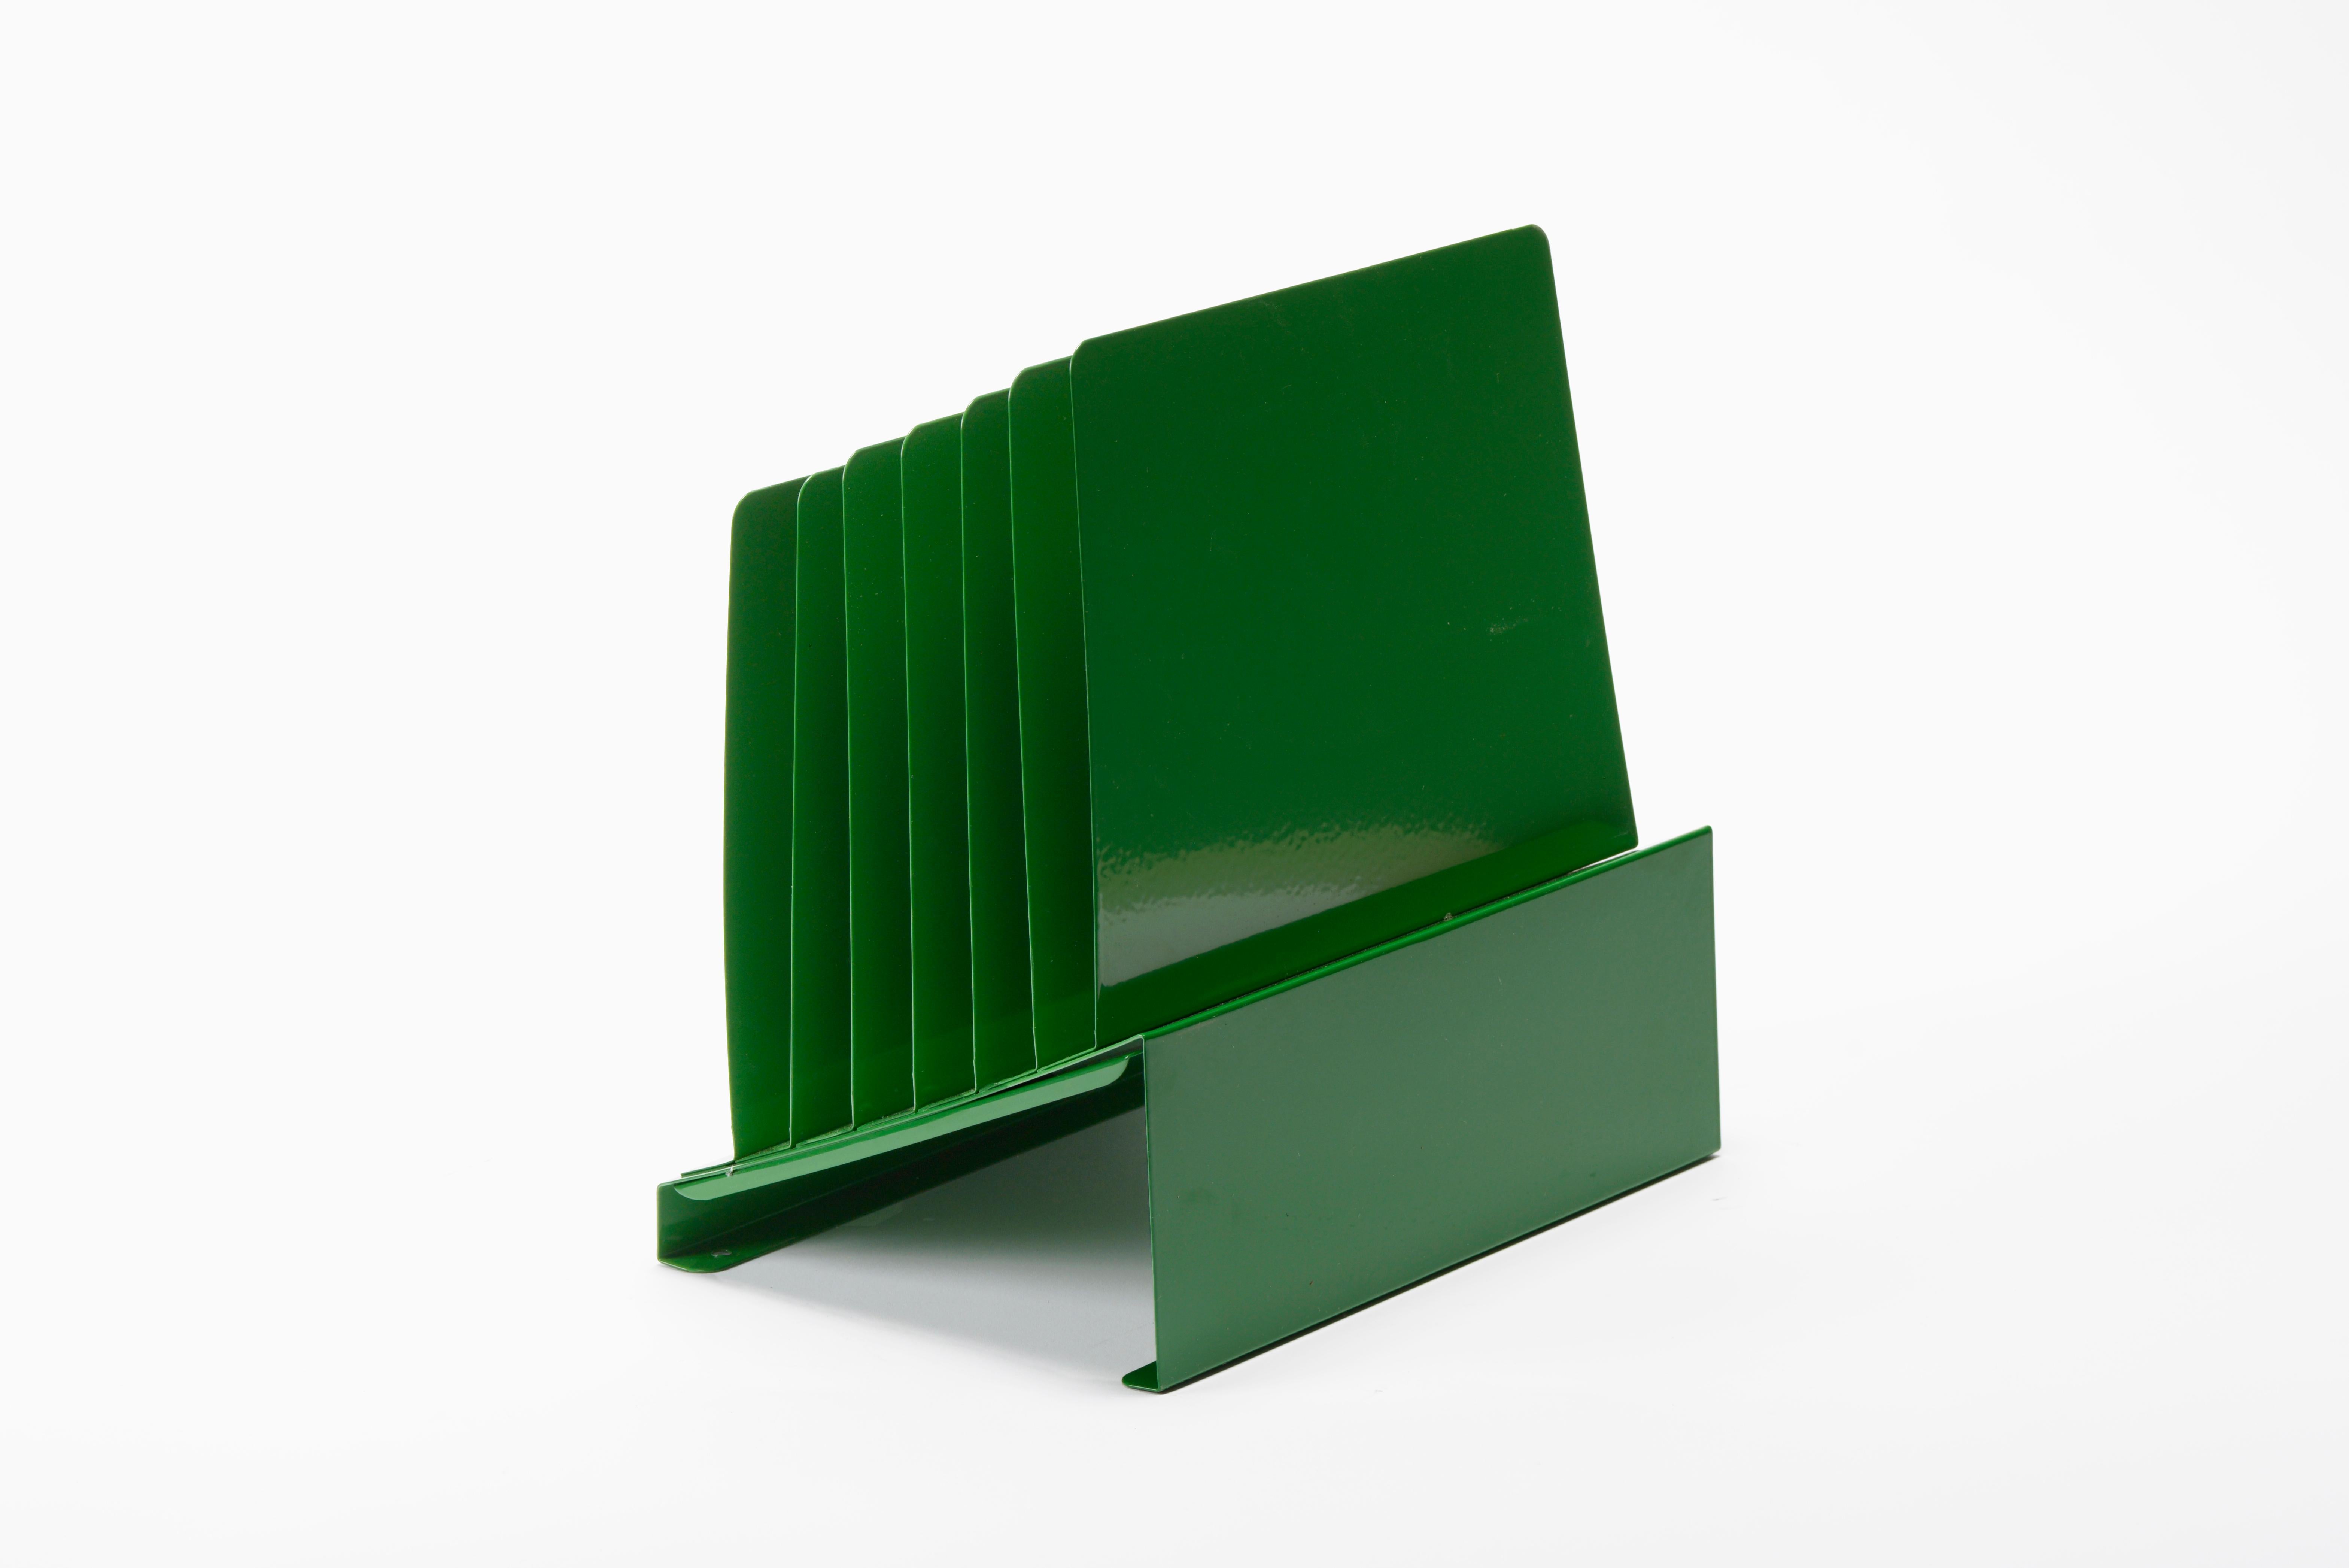 Powder-Coated Space Age Desktop File Holder, Refinished in Kelly Green